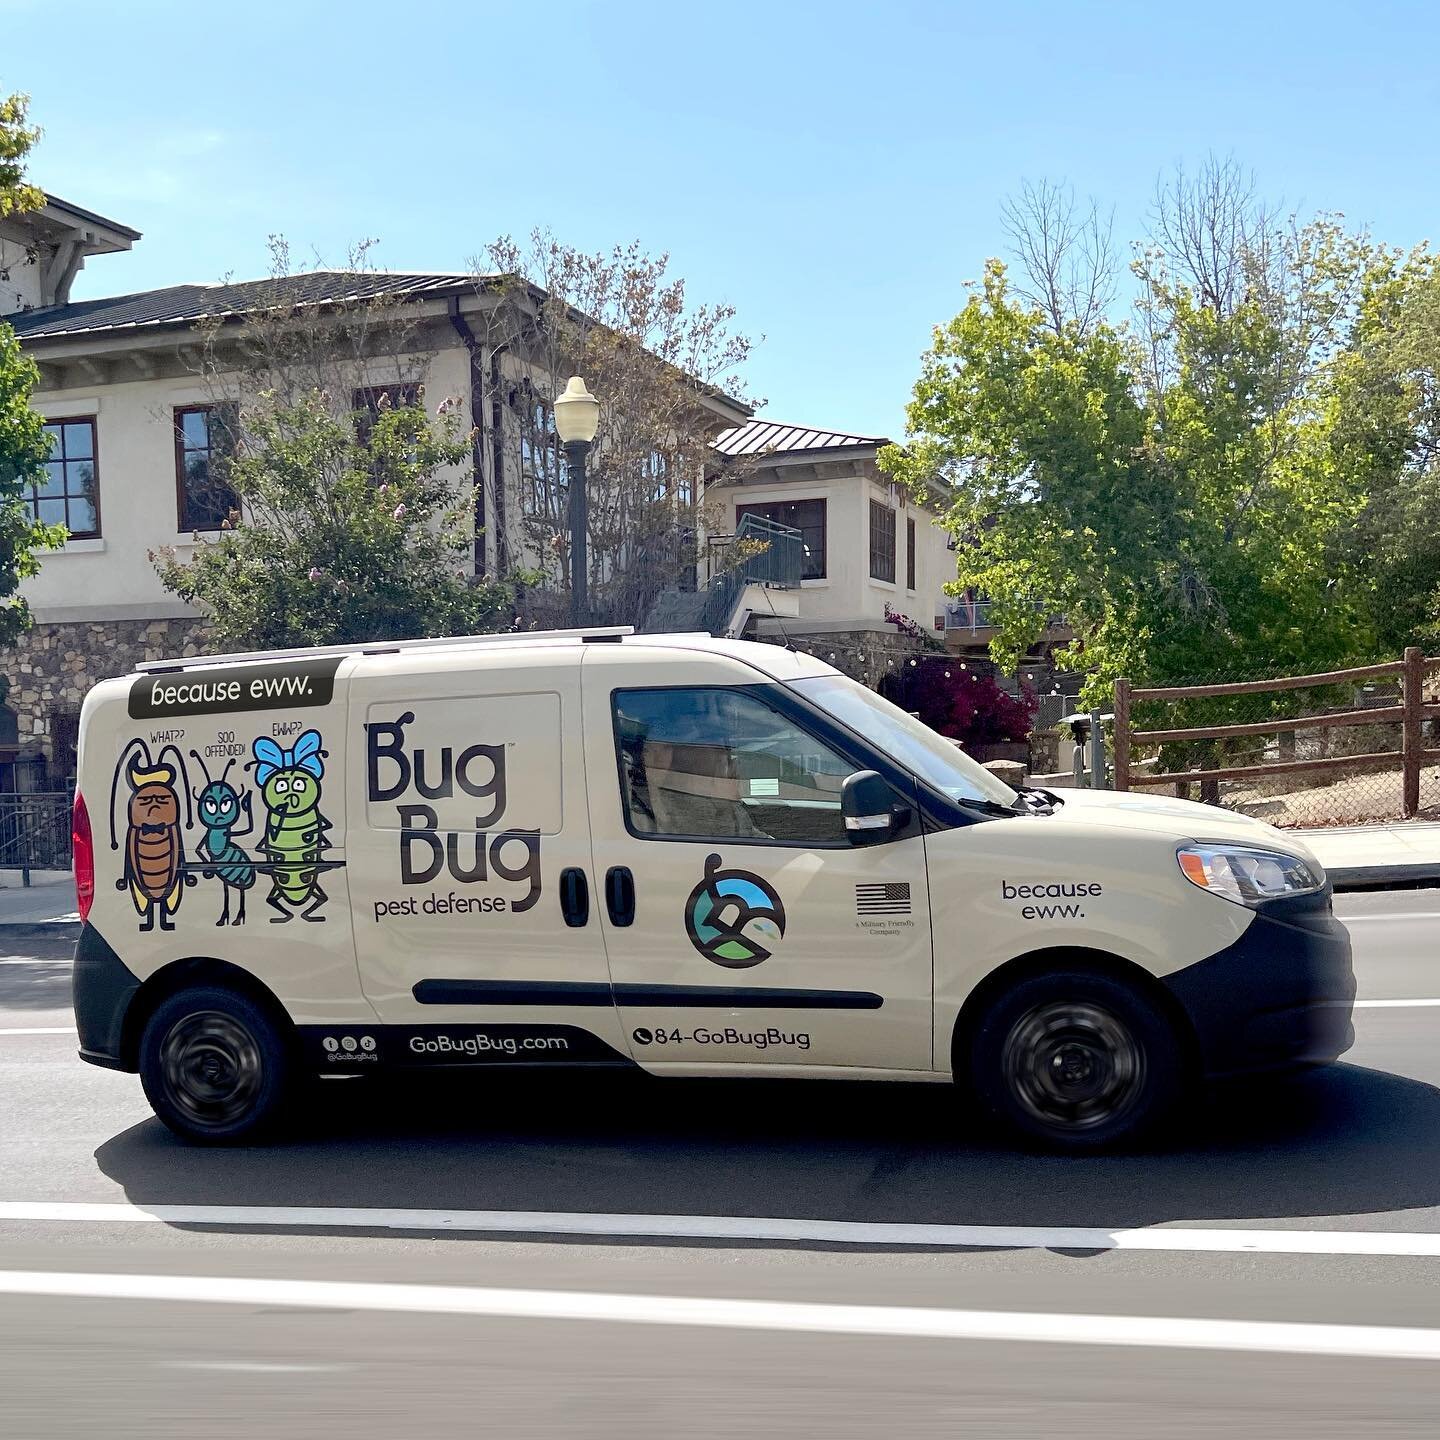 We are movin&rsquo;! Our business model was designed by expert-guided college students looking to positively impact pest control for both customer and technician taking a new approach to an industry that hasn&rsquo;t been disrupted in decades&hellip;